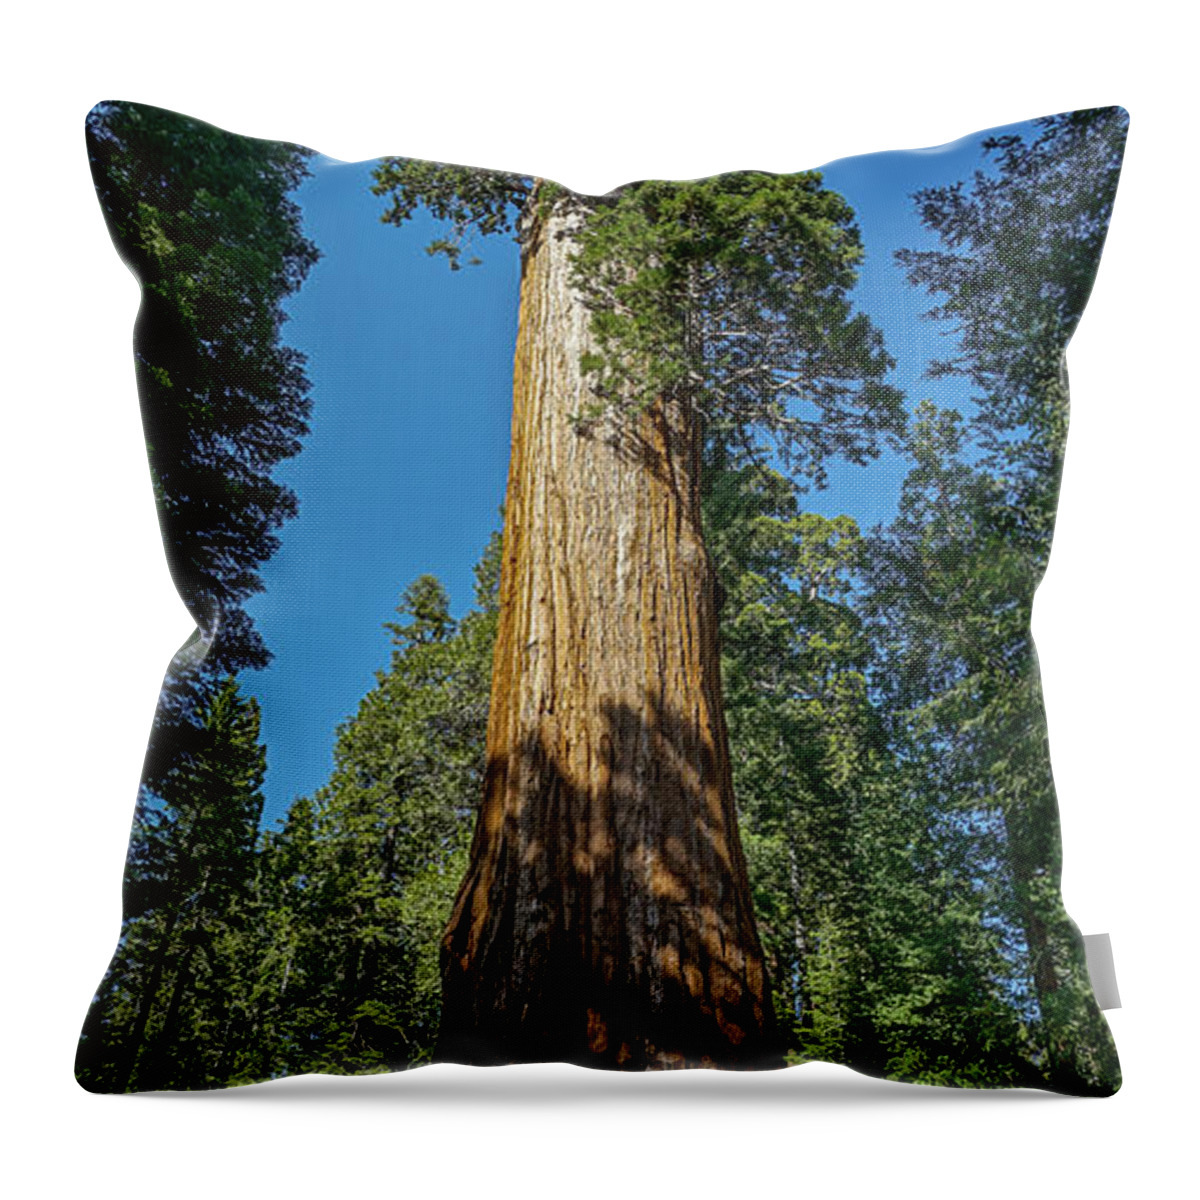 General Grant Tree Throw Pillow featuring the photograph General Grant by Brett Harvey